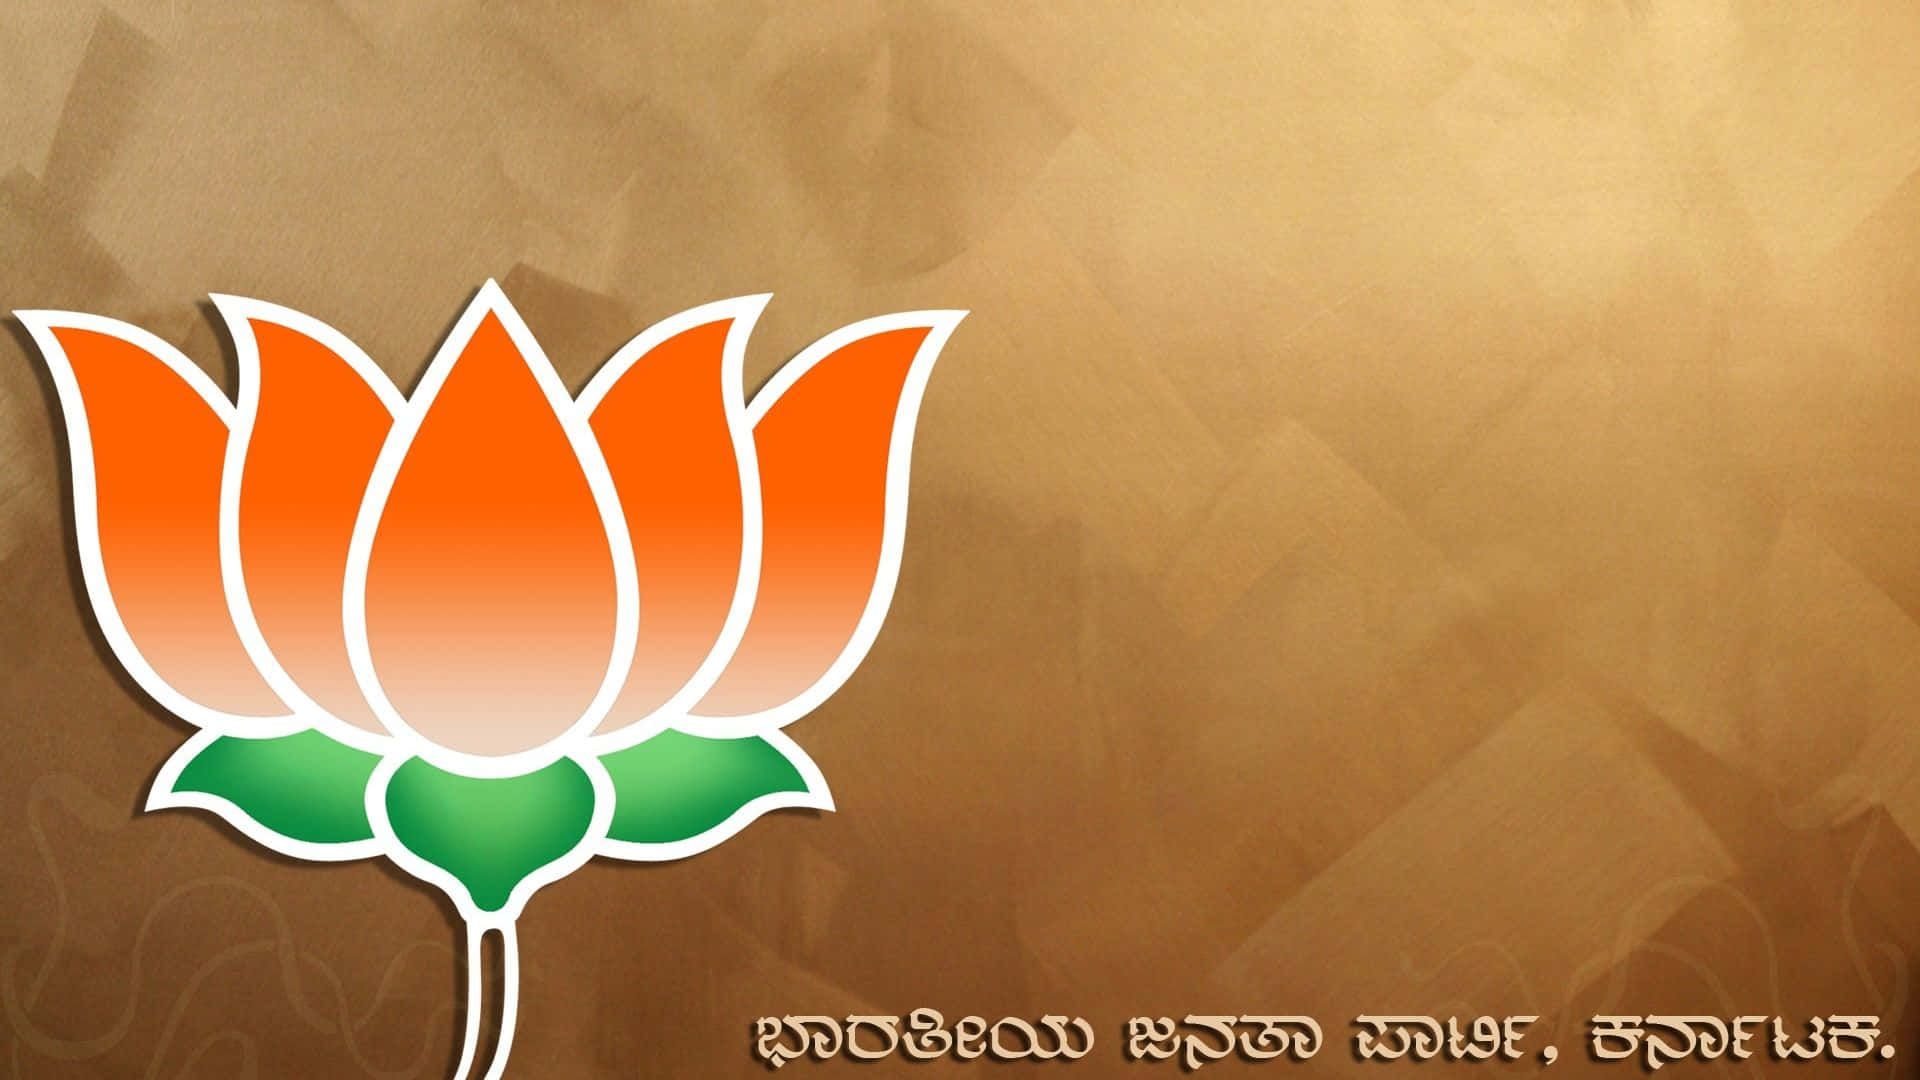 The BJP is empowering India